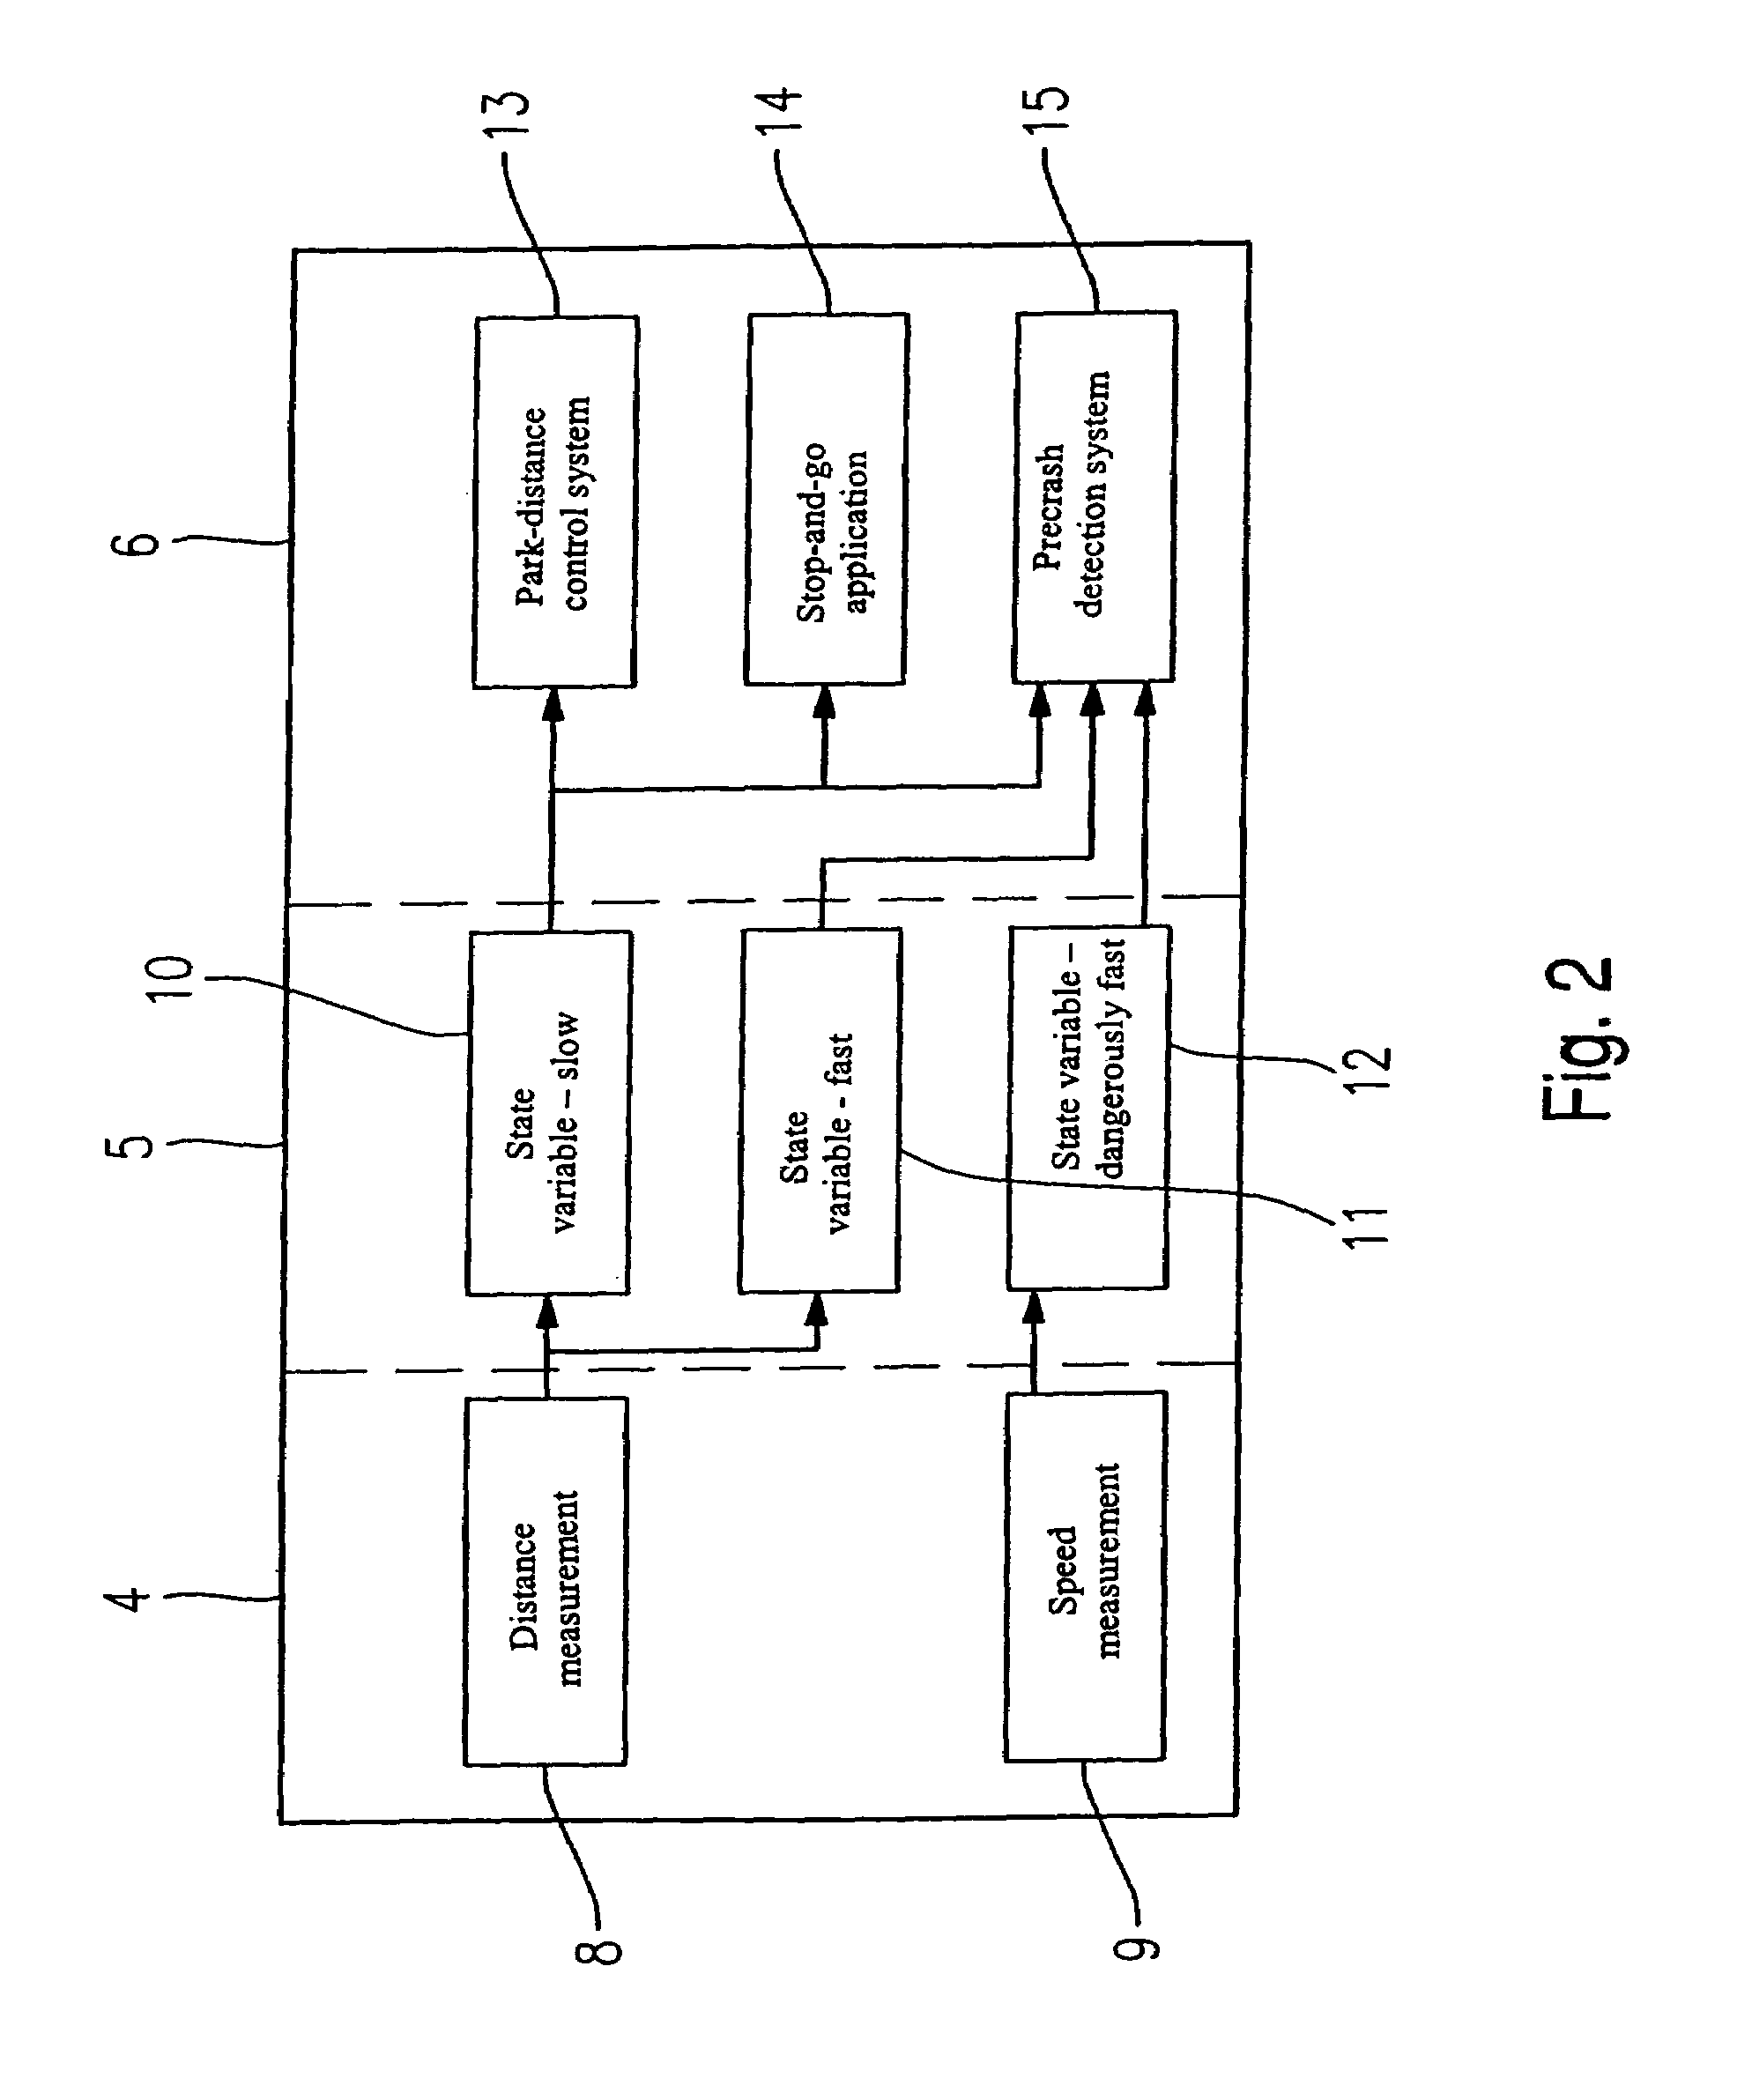 Method for controlling and evaluating a sensor device shared by a plurality of applications